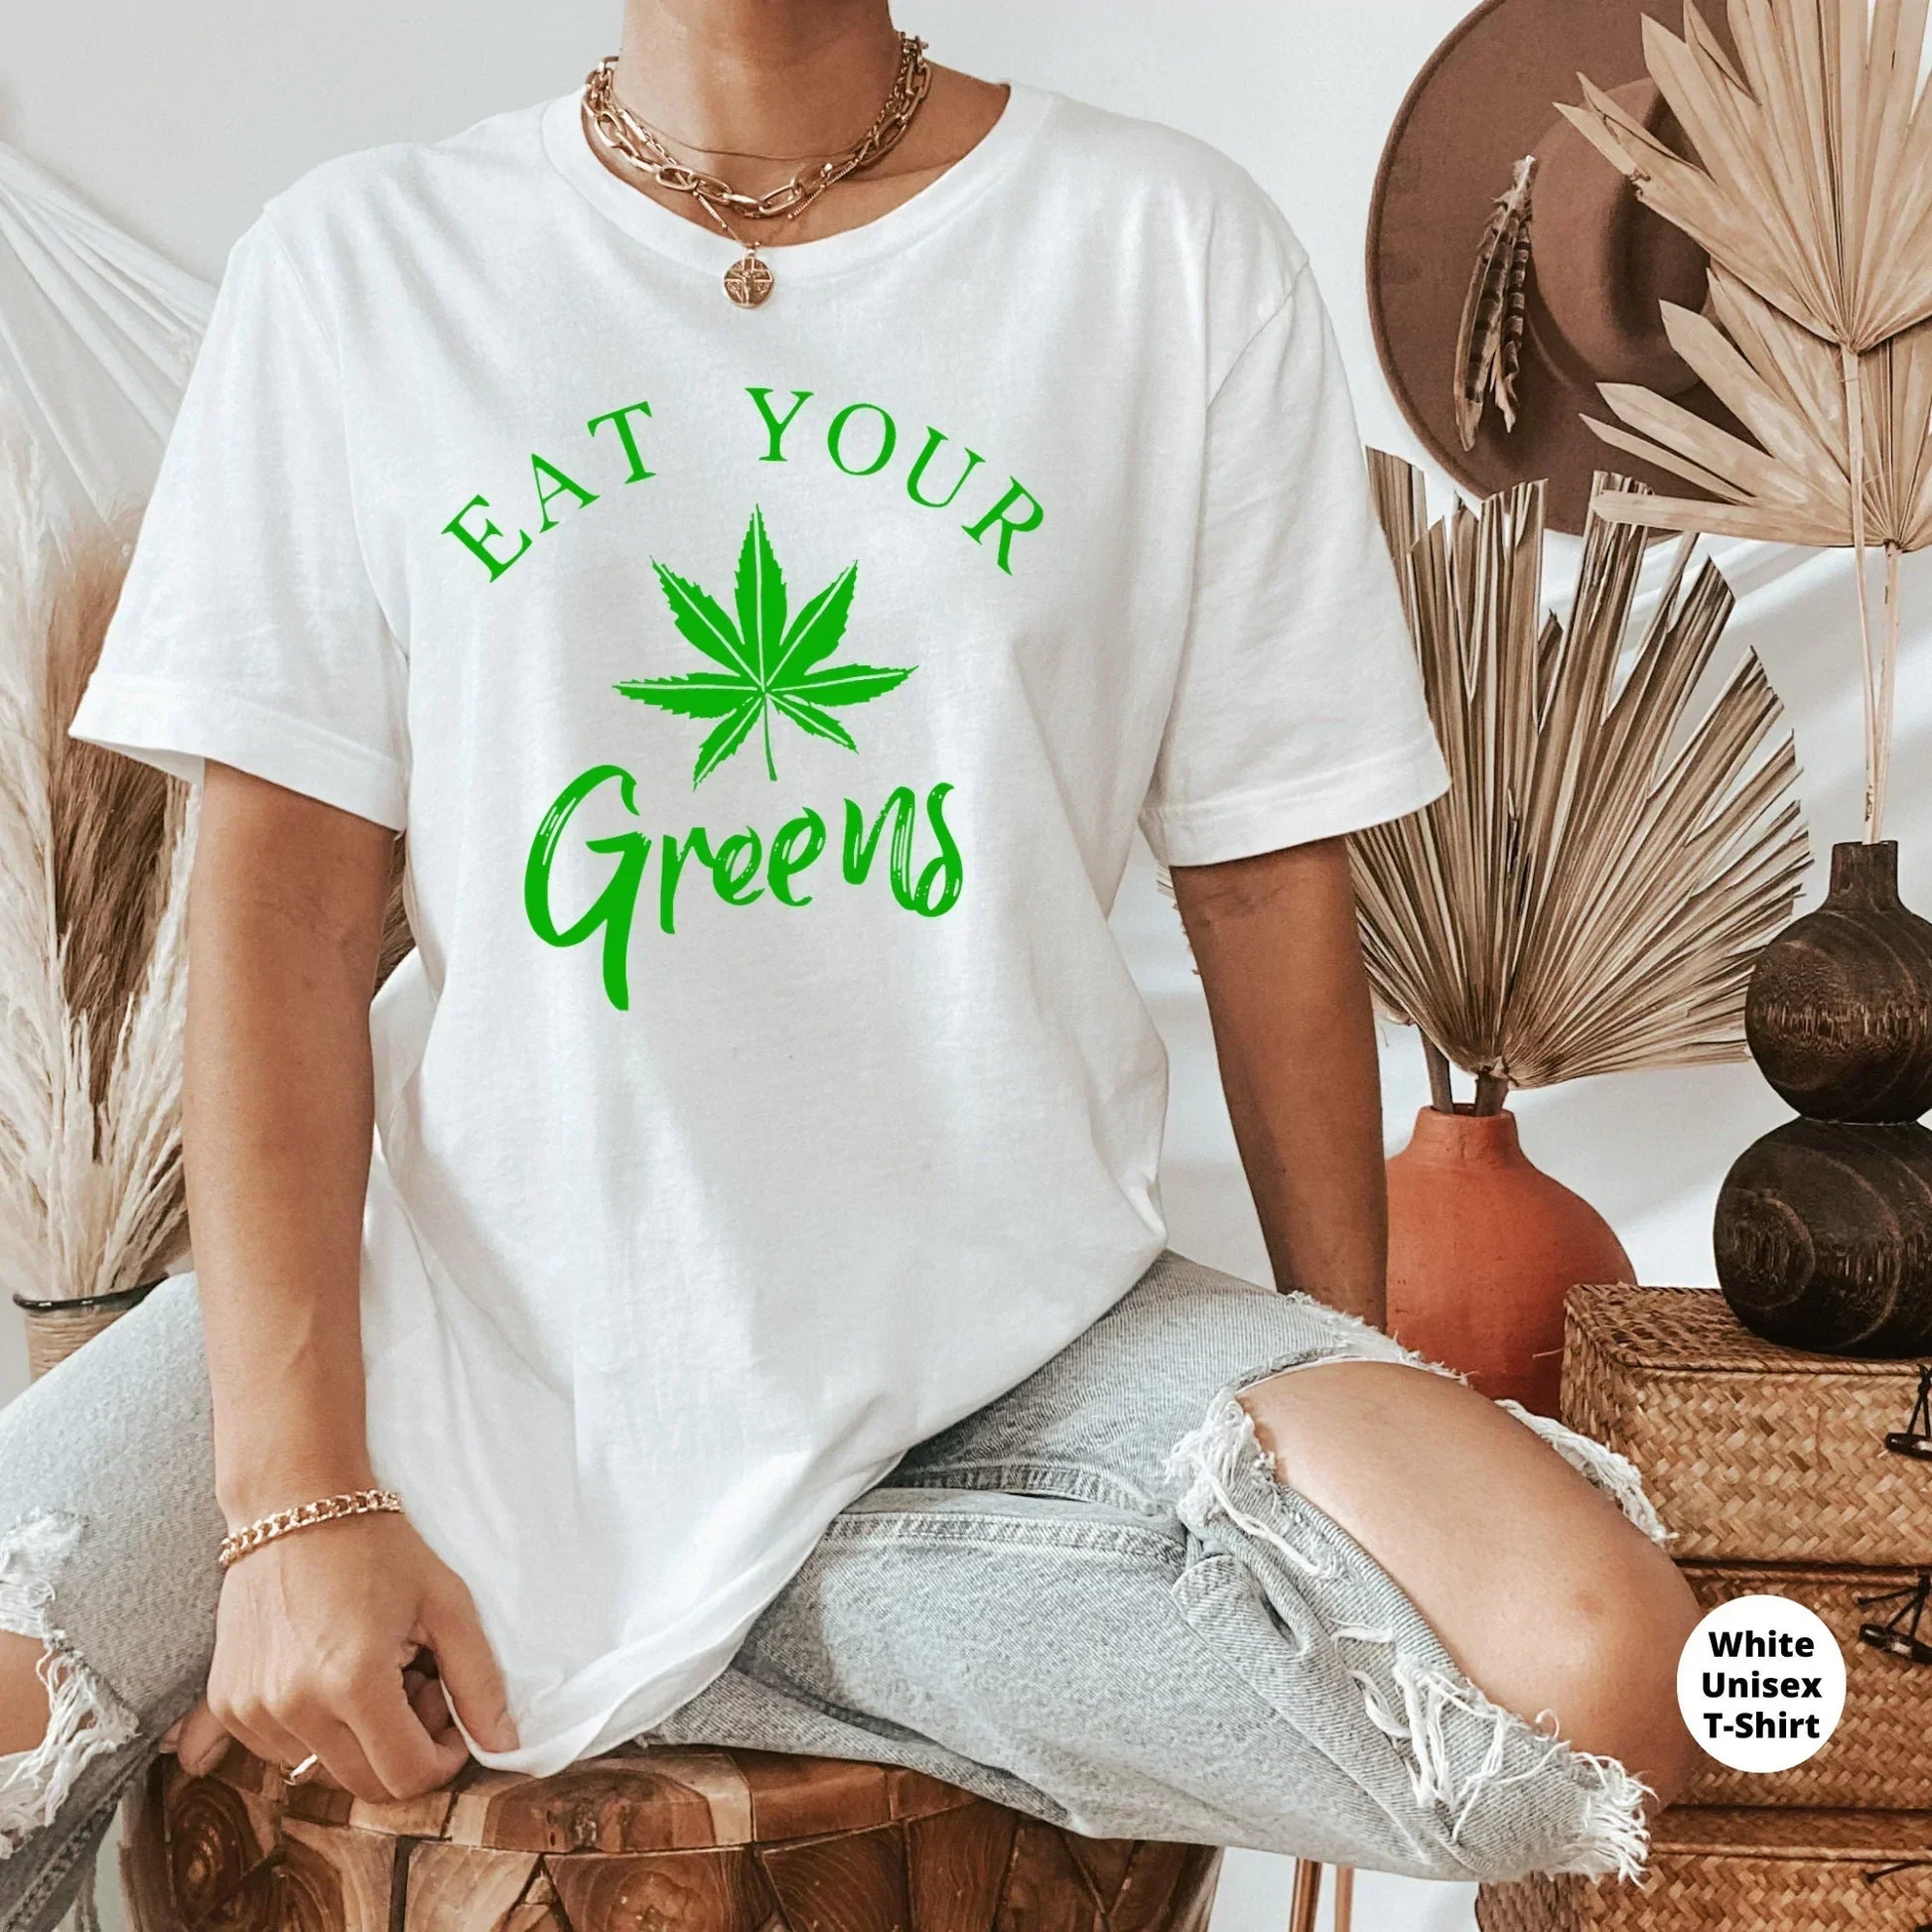 Eat Your Greens, Funny Stoner Shirt